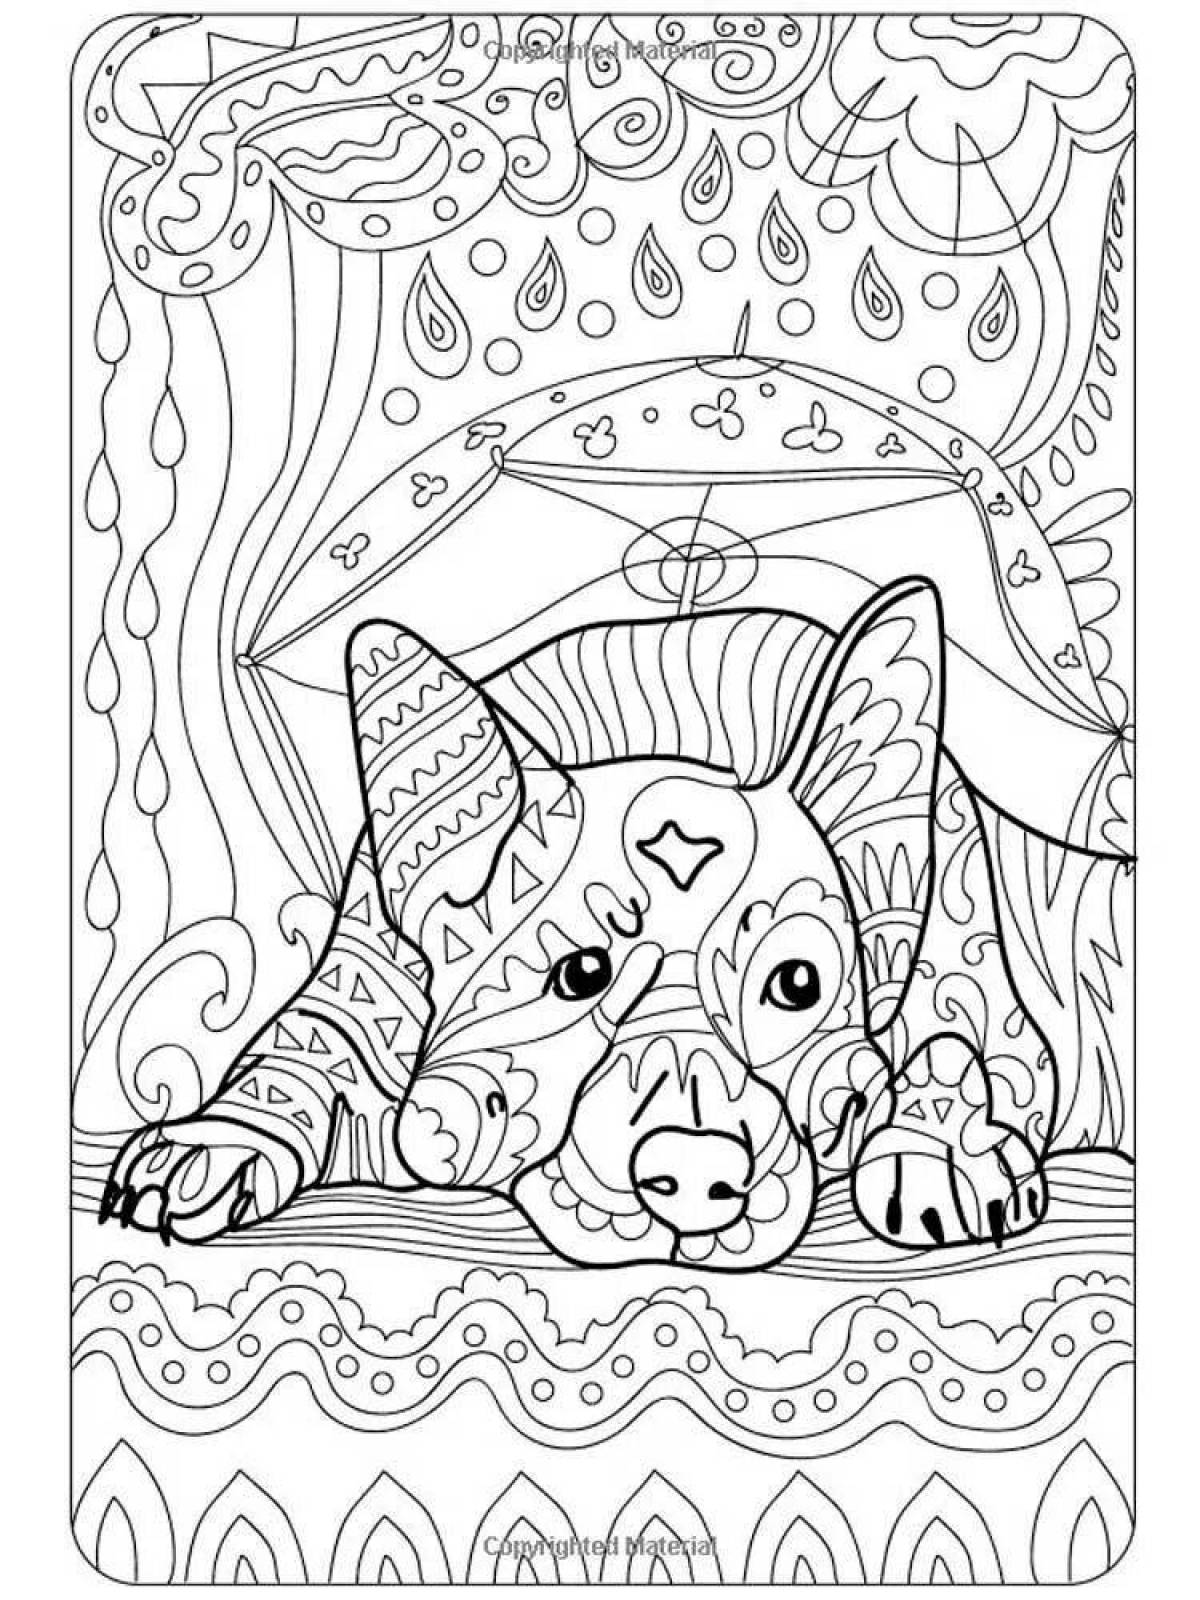 Affectionate dog coloring pages for adults